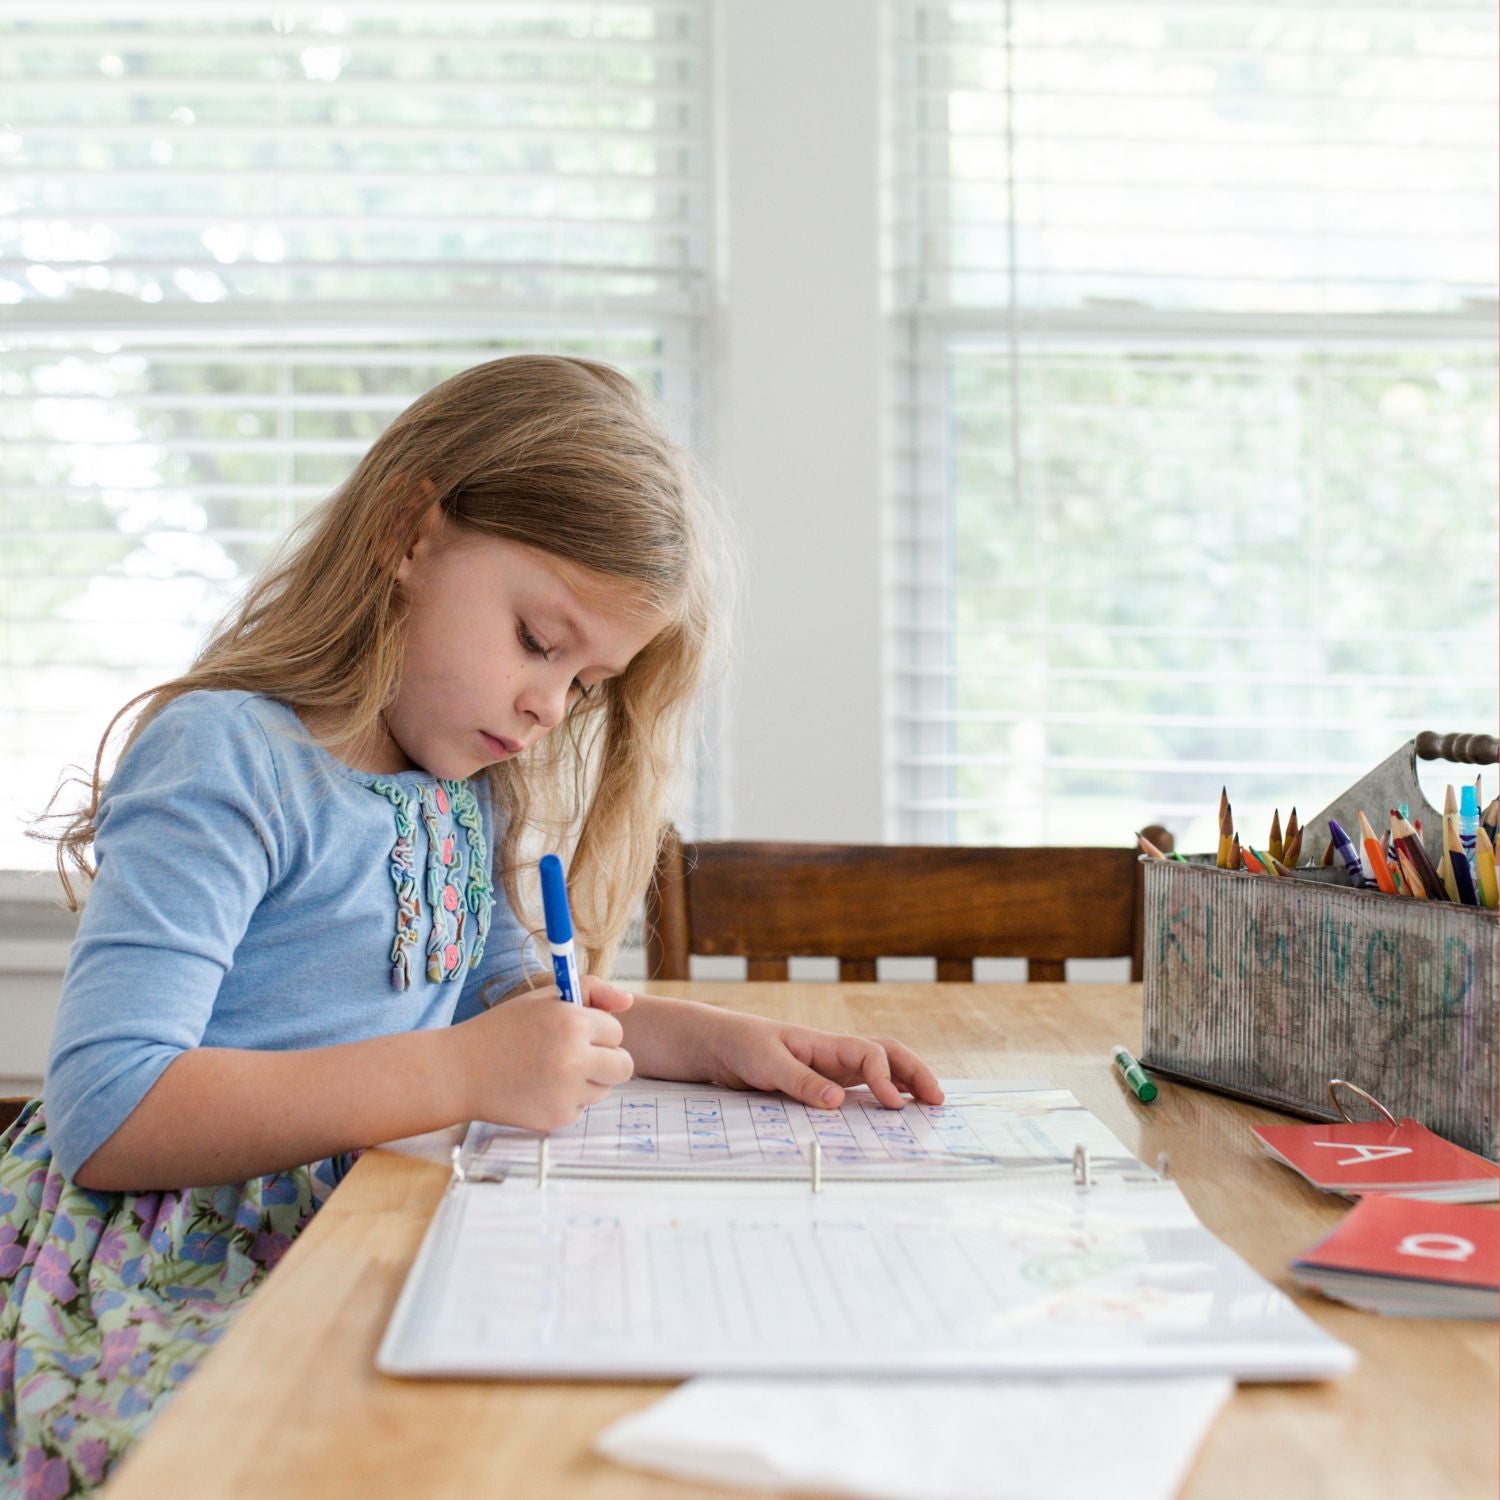 Homeschooling Made Simple: Featuring Our Reusable Binder Bundle